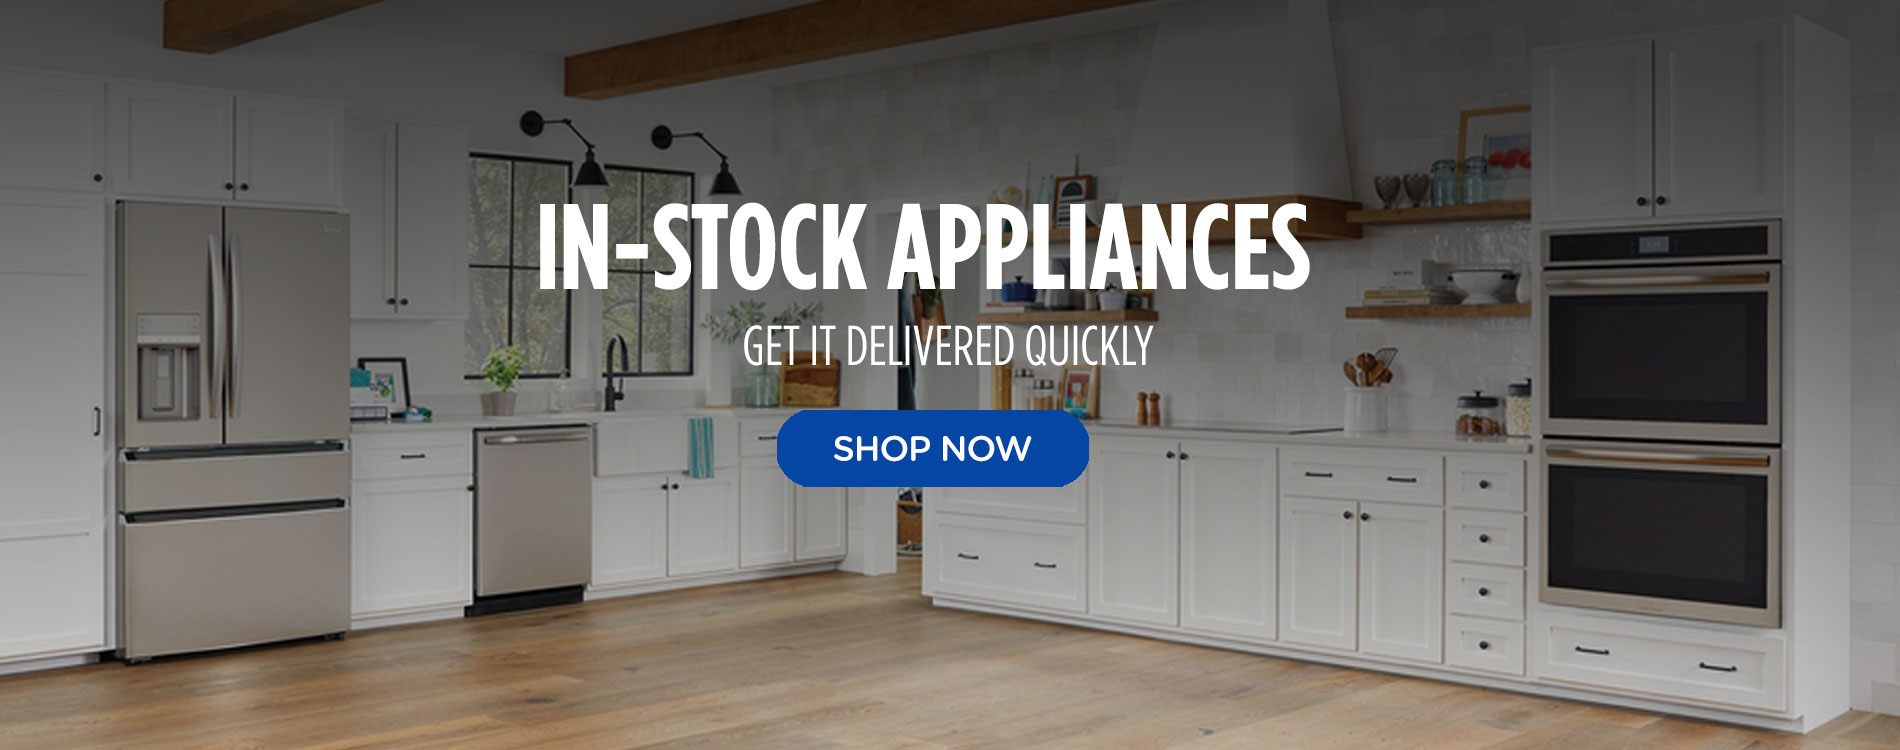 In-stock Appliances get it delivered quickly. Shop Now